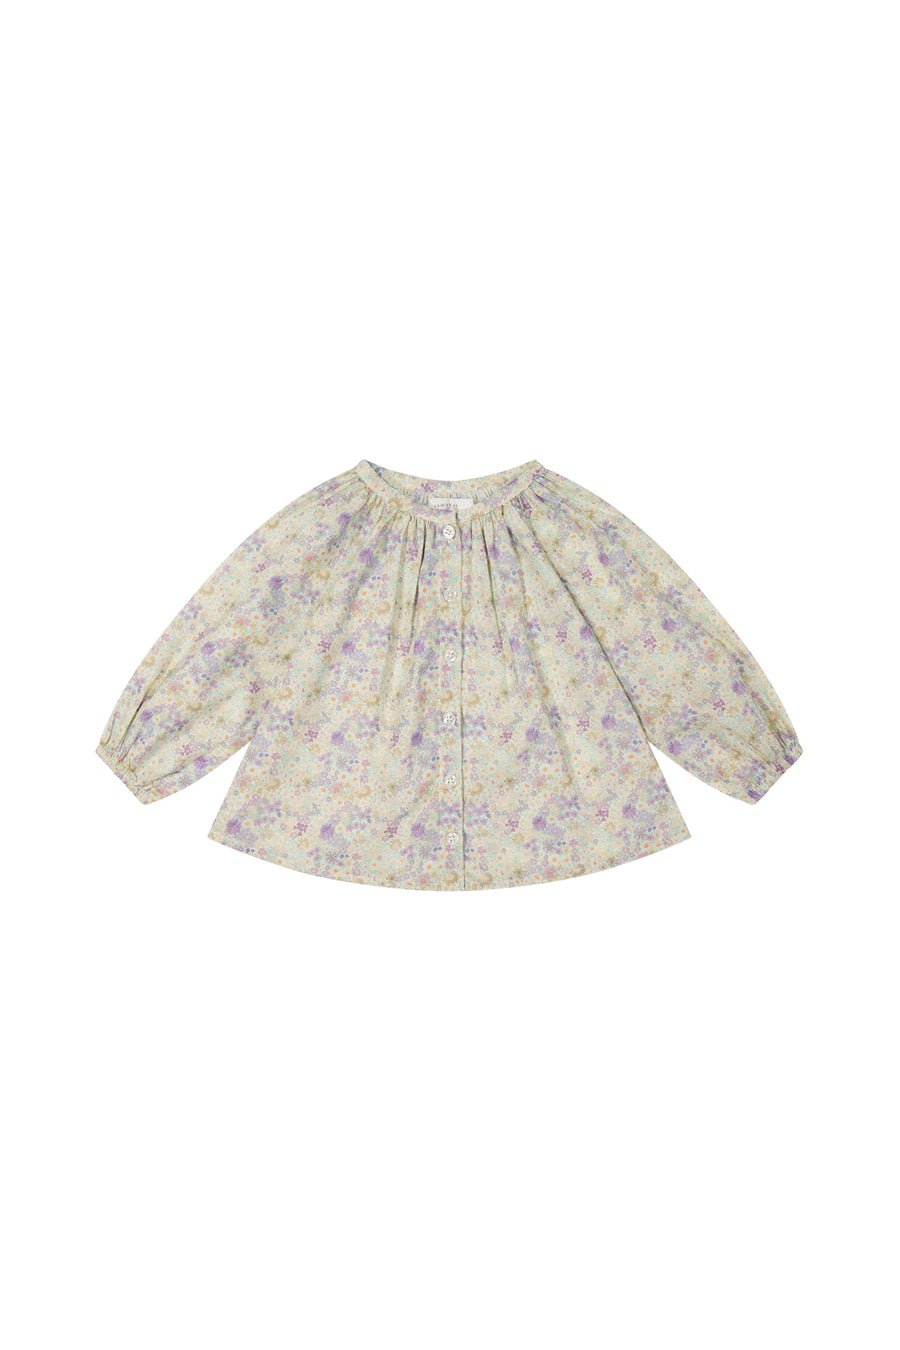 Organic Cotton Heather Blouse - Mayflower Childrens Top from Jamie Kay NZ